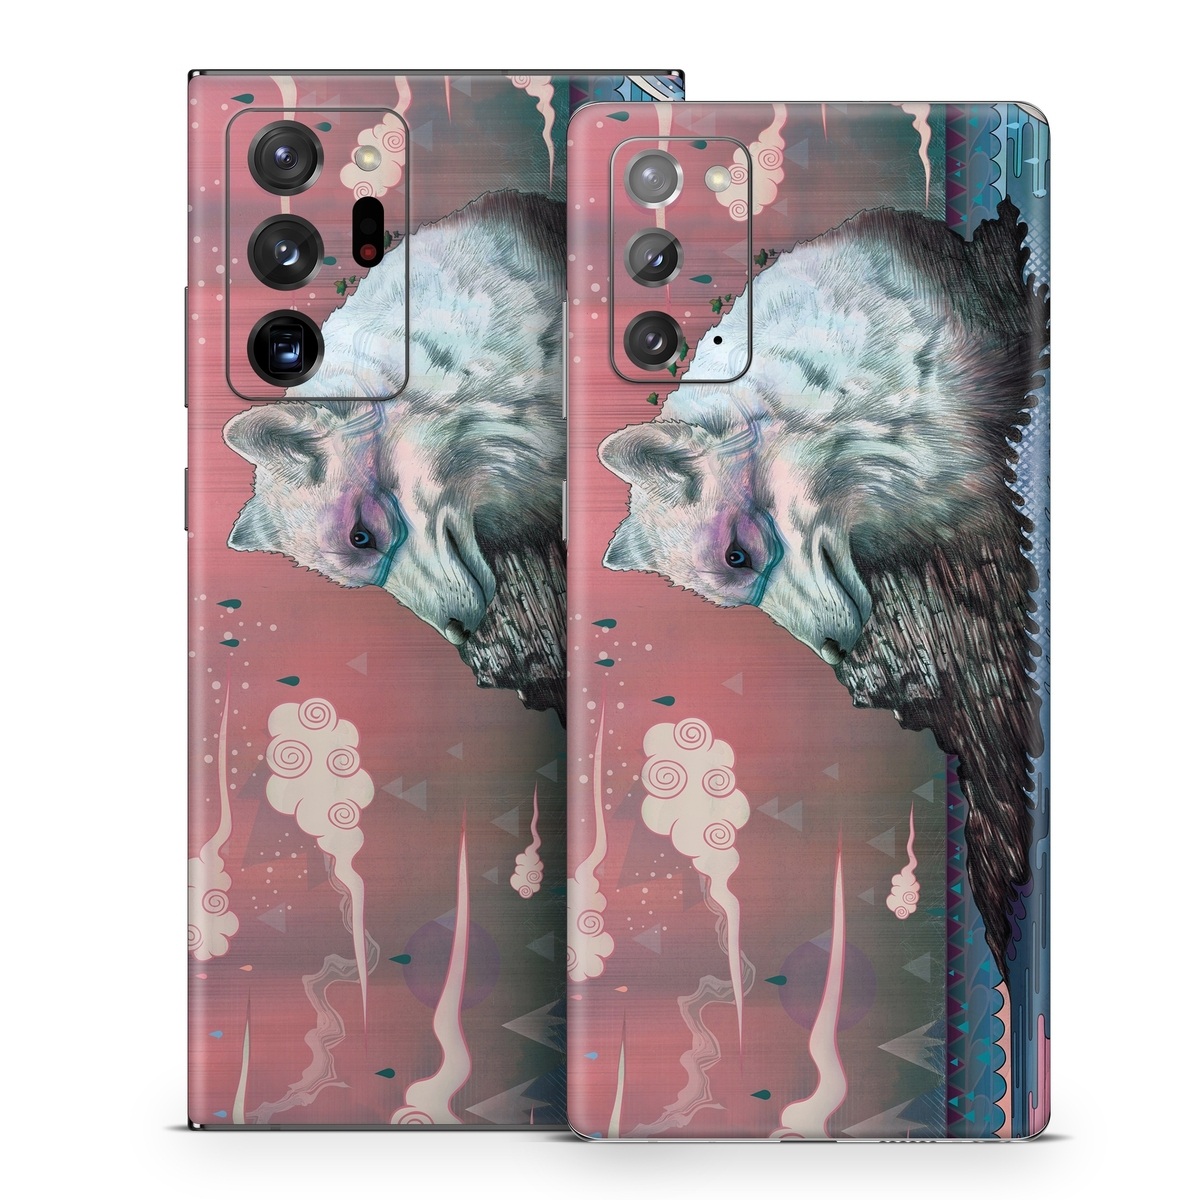 Samsung Galaxy Note 20 Skin design of Illustration, Art, with gray, black, blue, red, purple colors